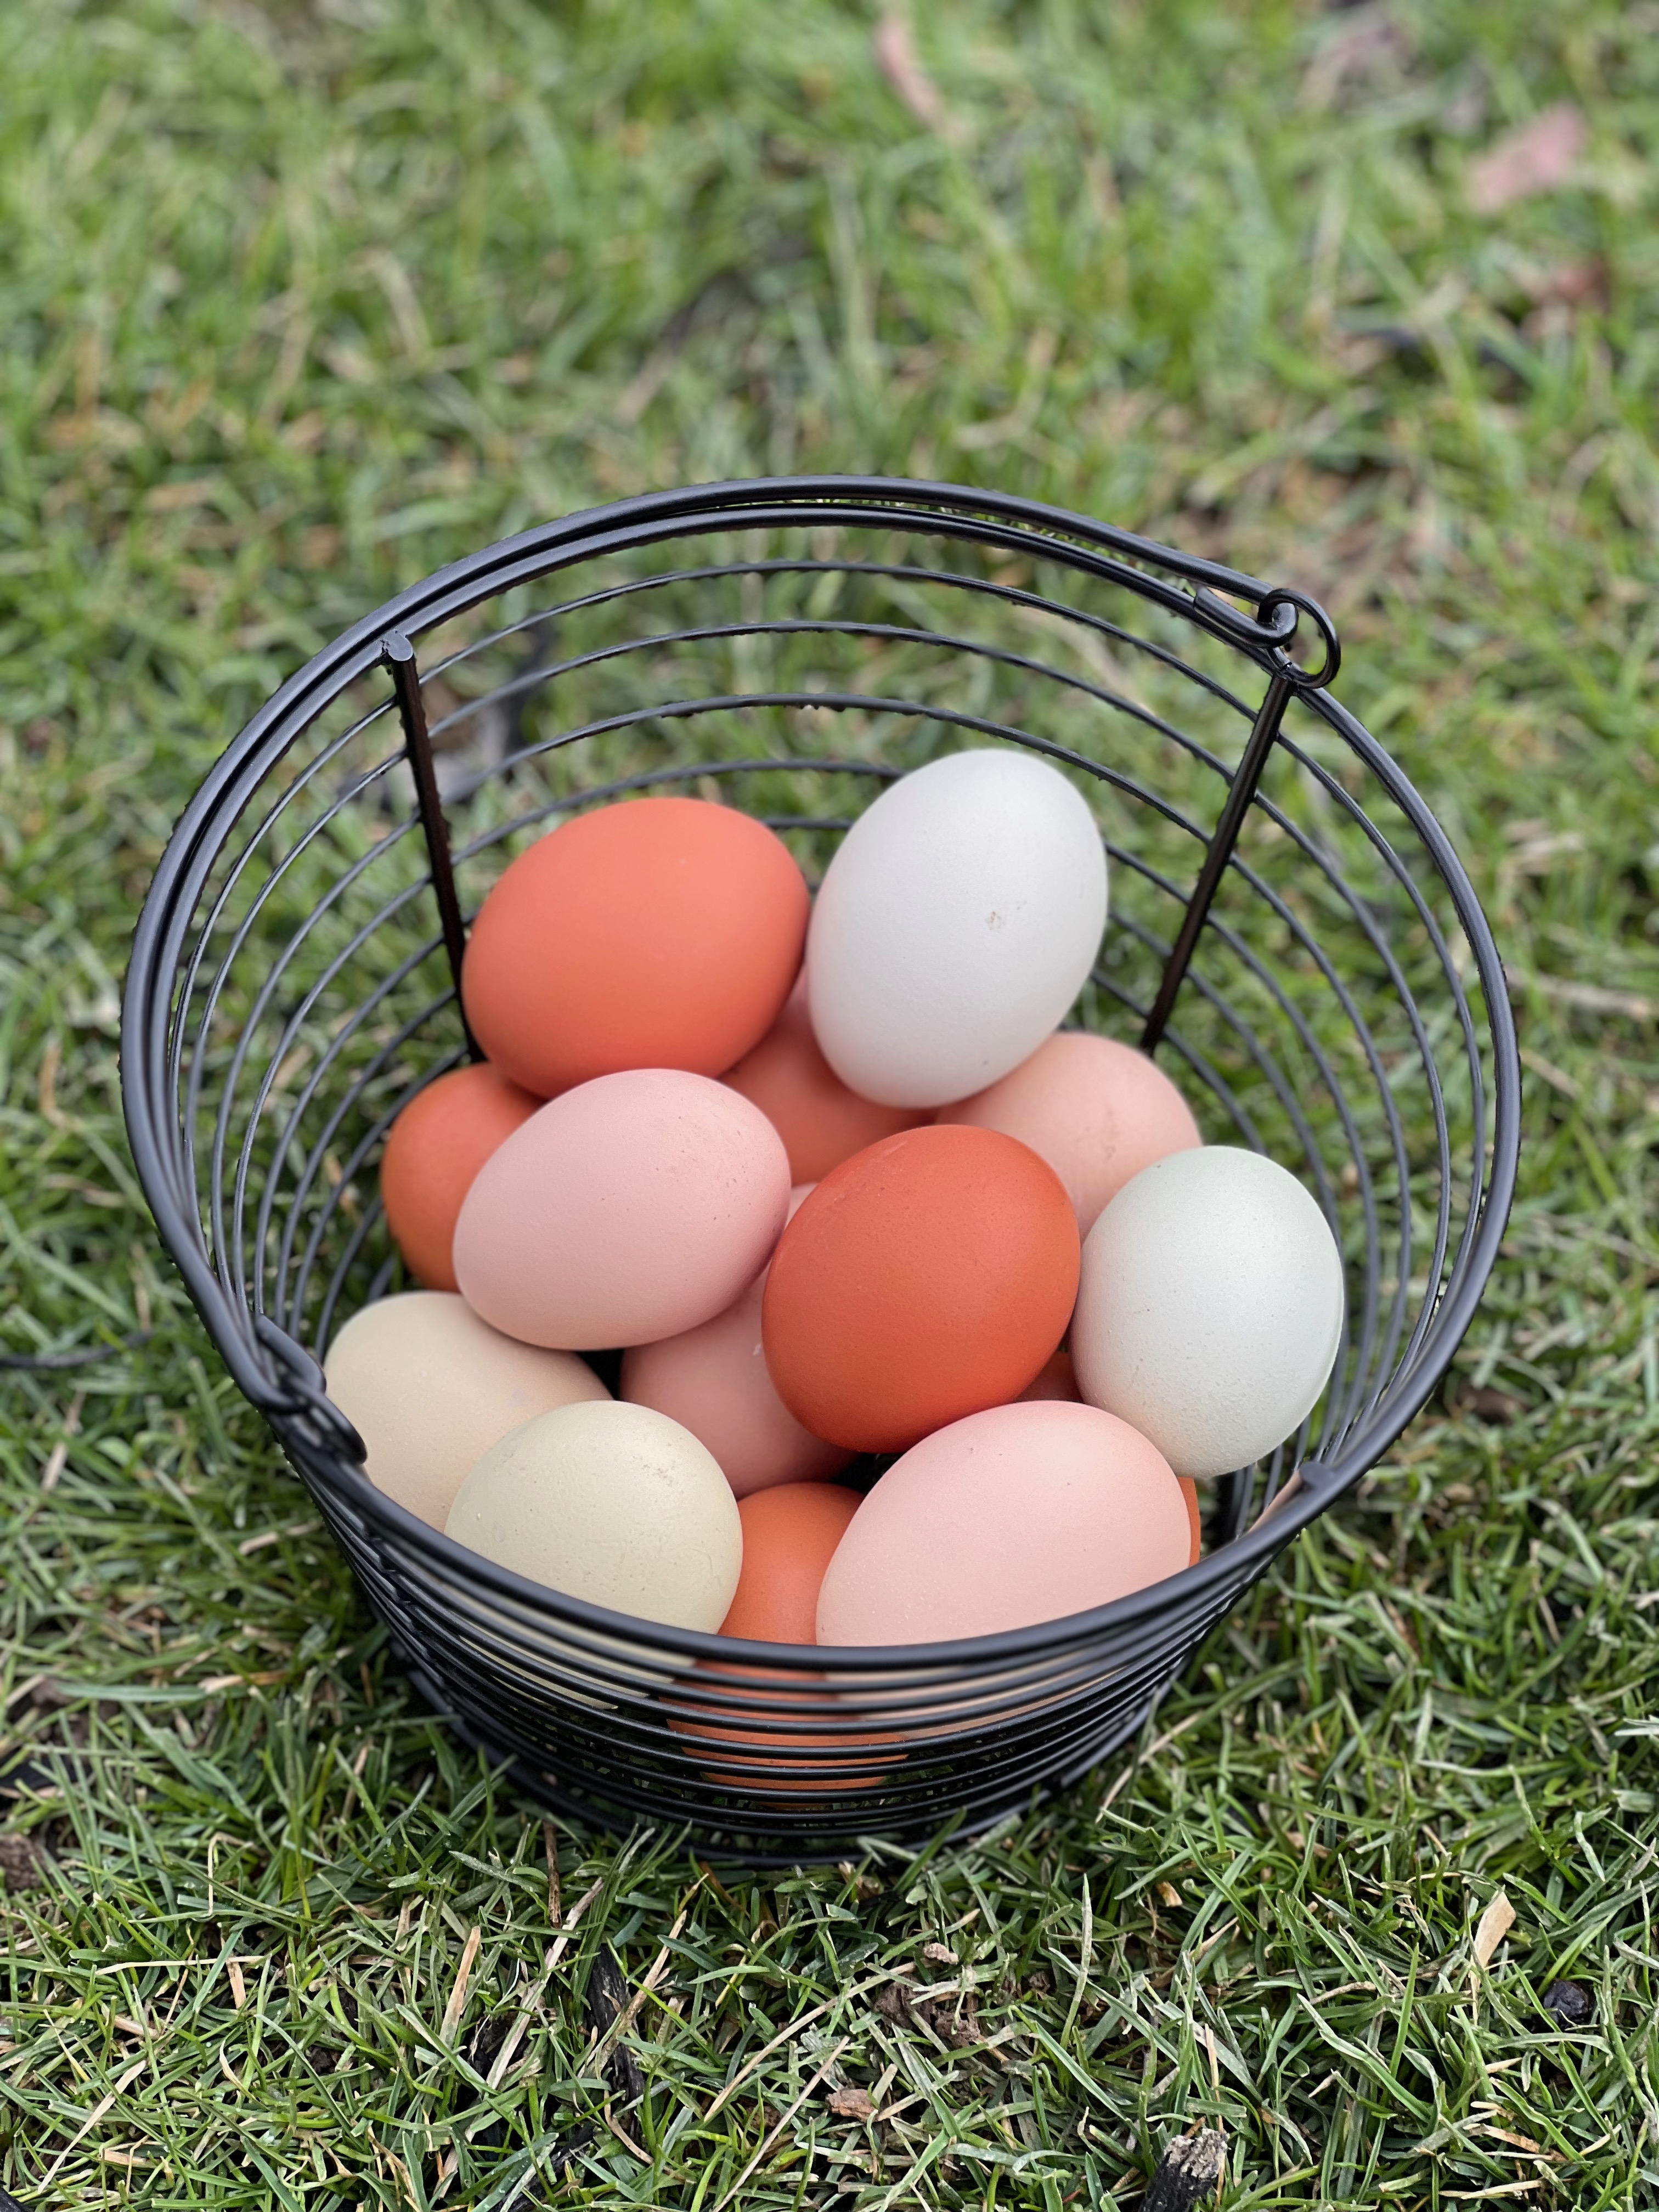 Basket sitting in grass full of colorful eggs from backyard chickens